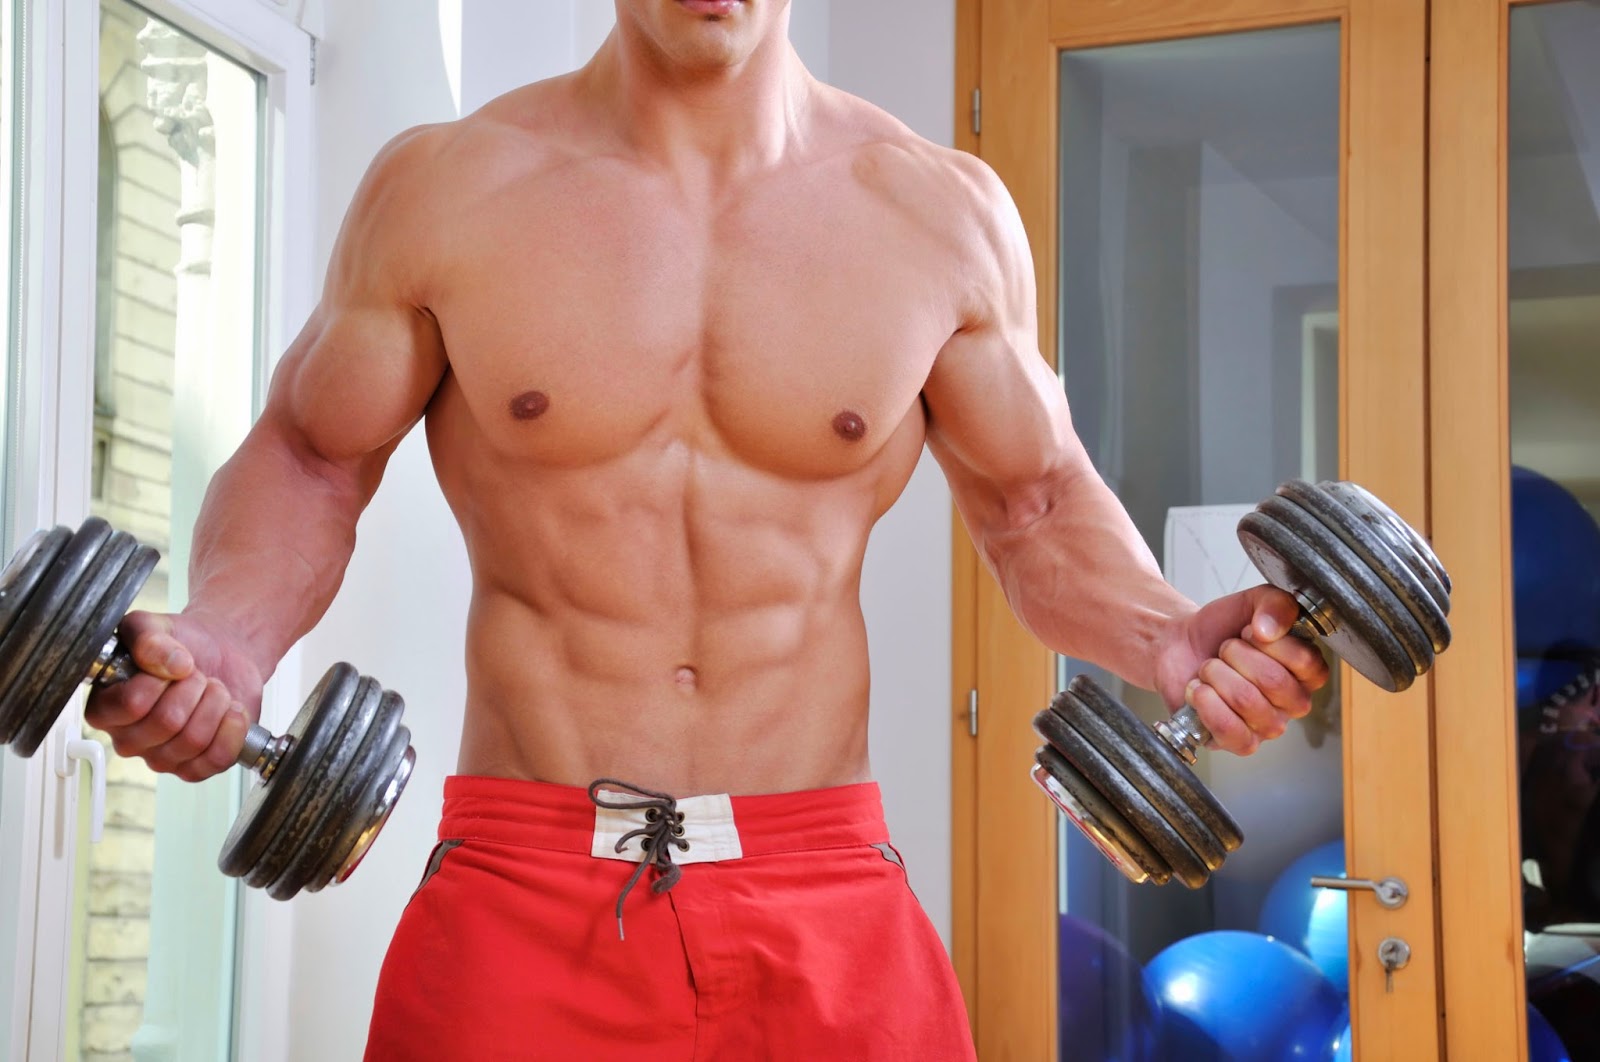  Workout Tips to Get Ripped